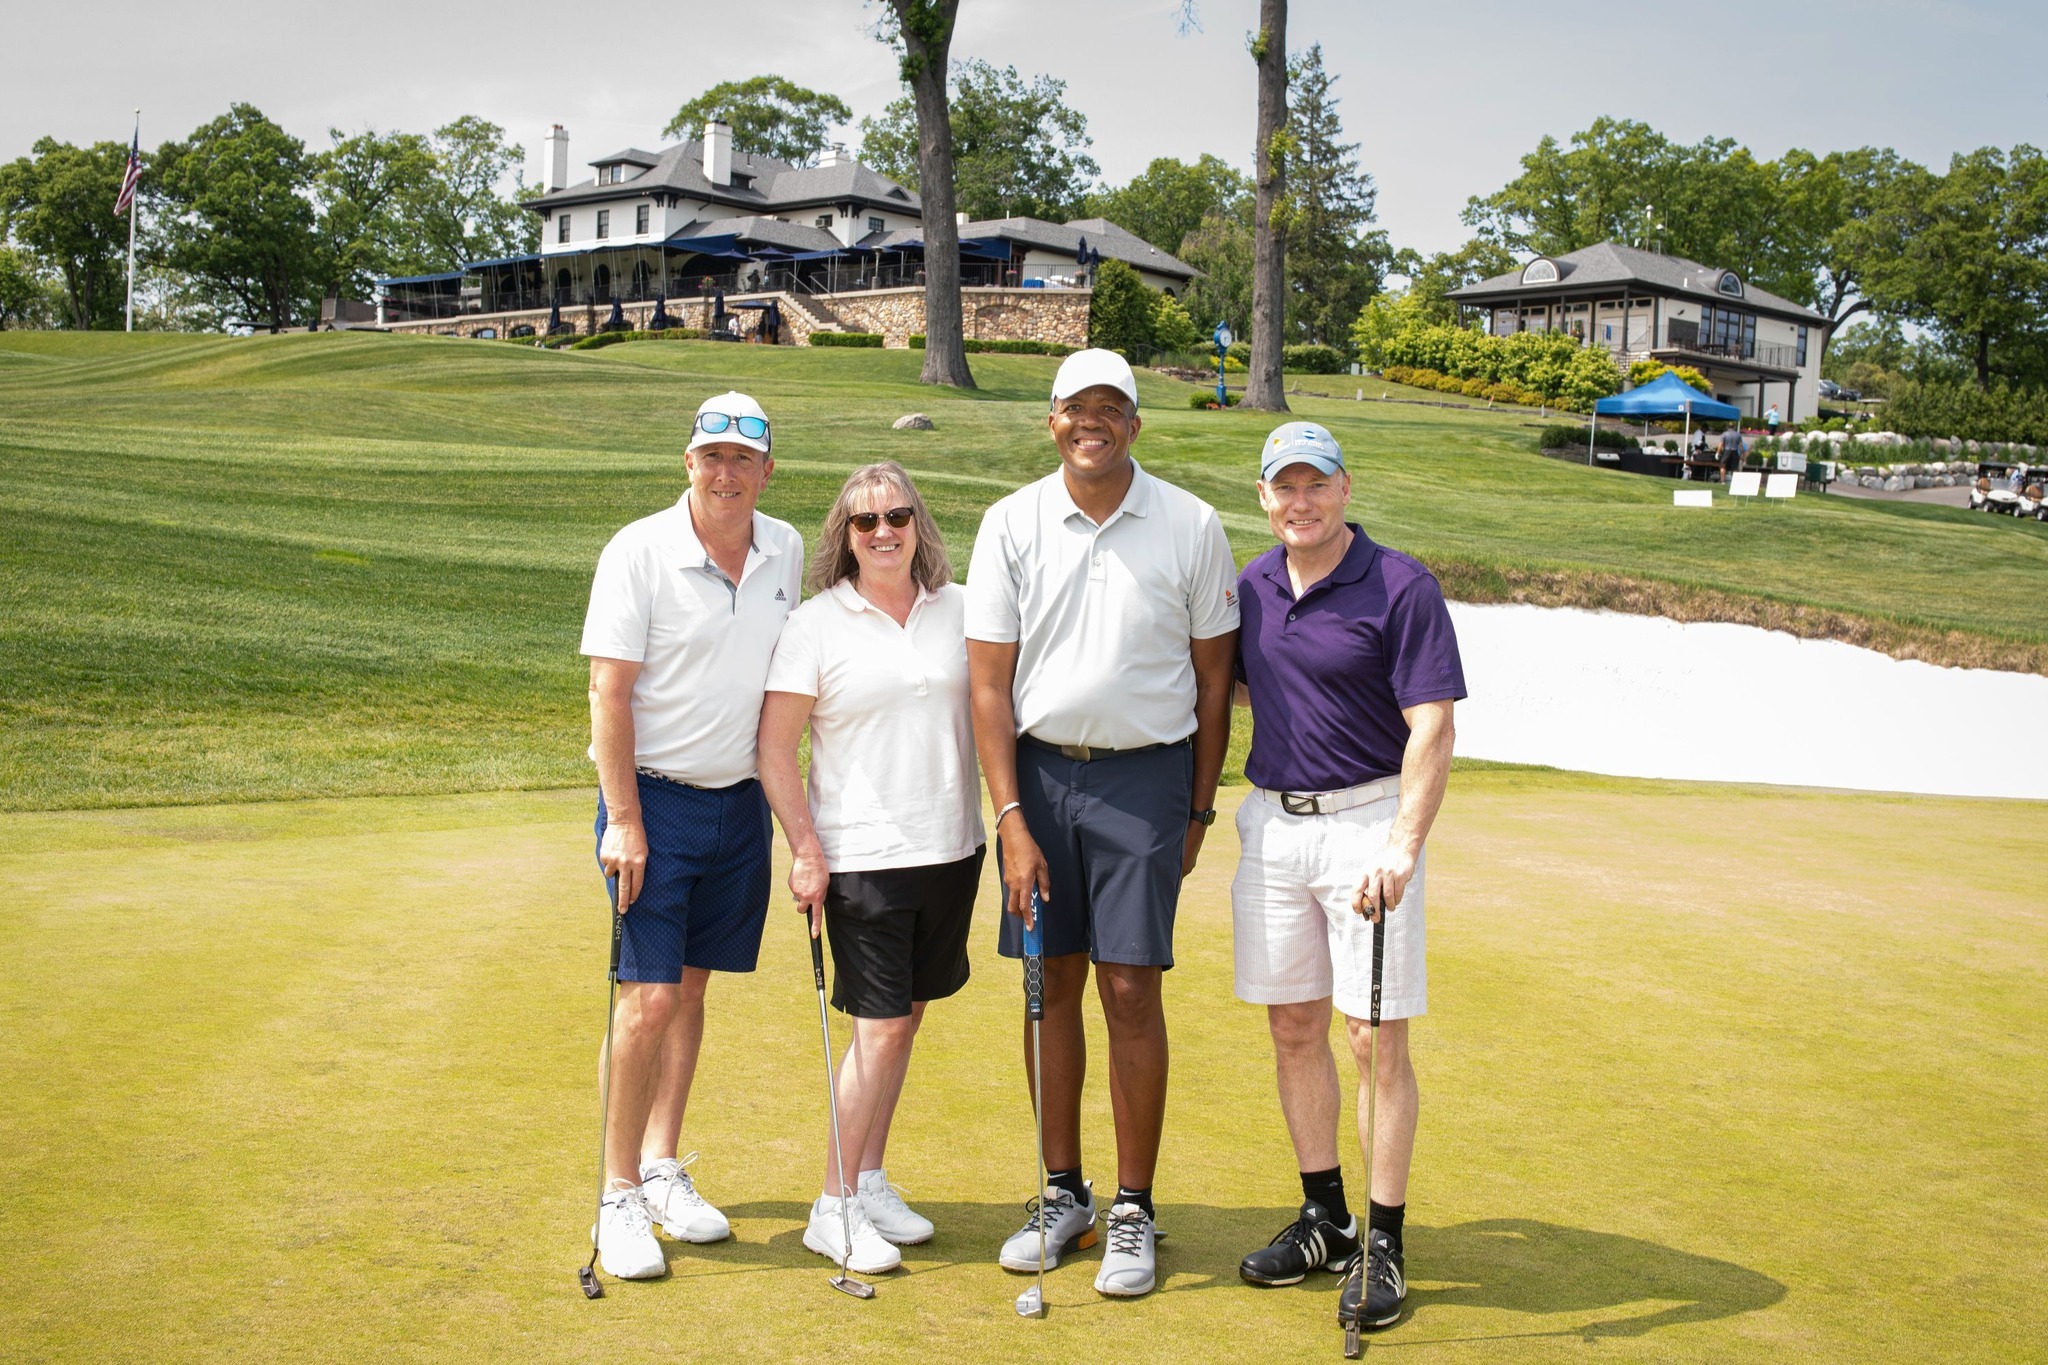 Four golfers standing on the golf course at the 2023 NJ Golf Classic